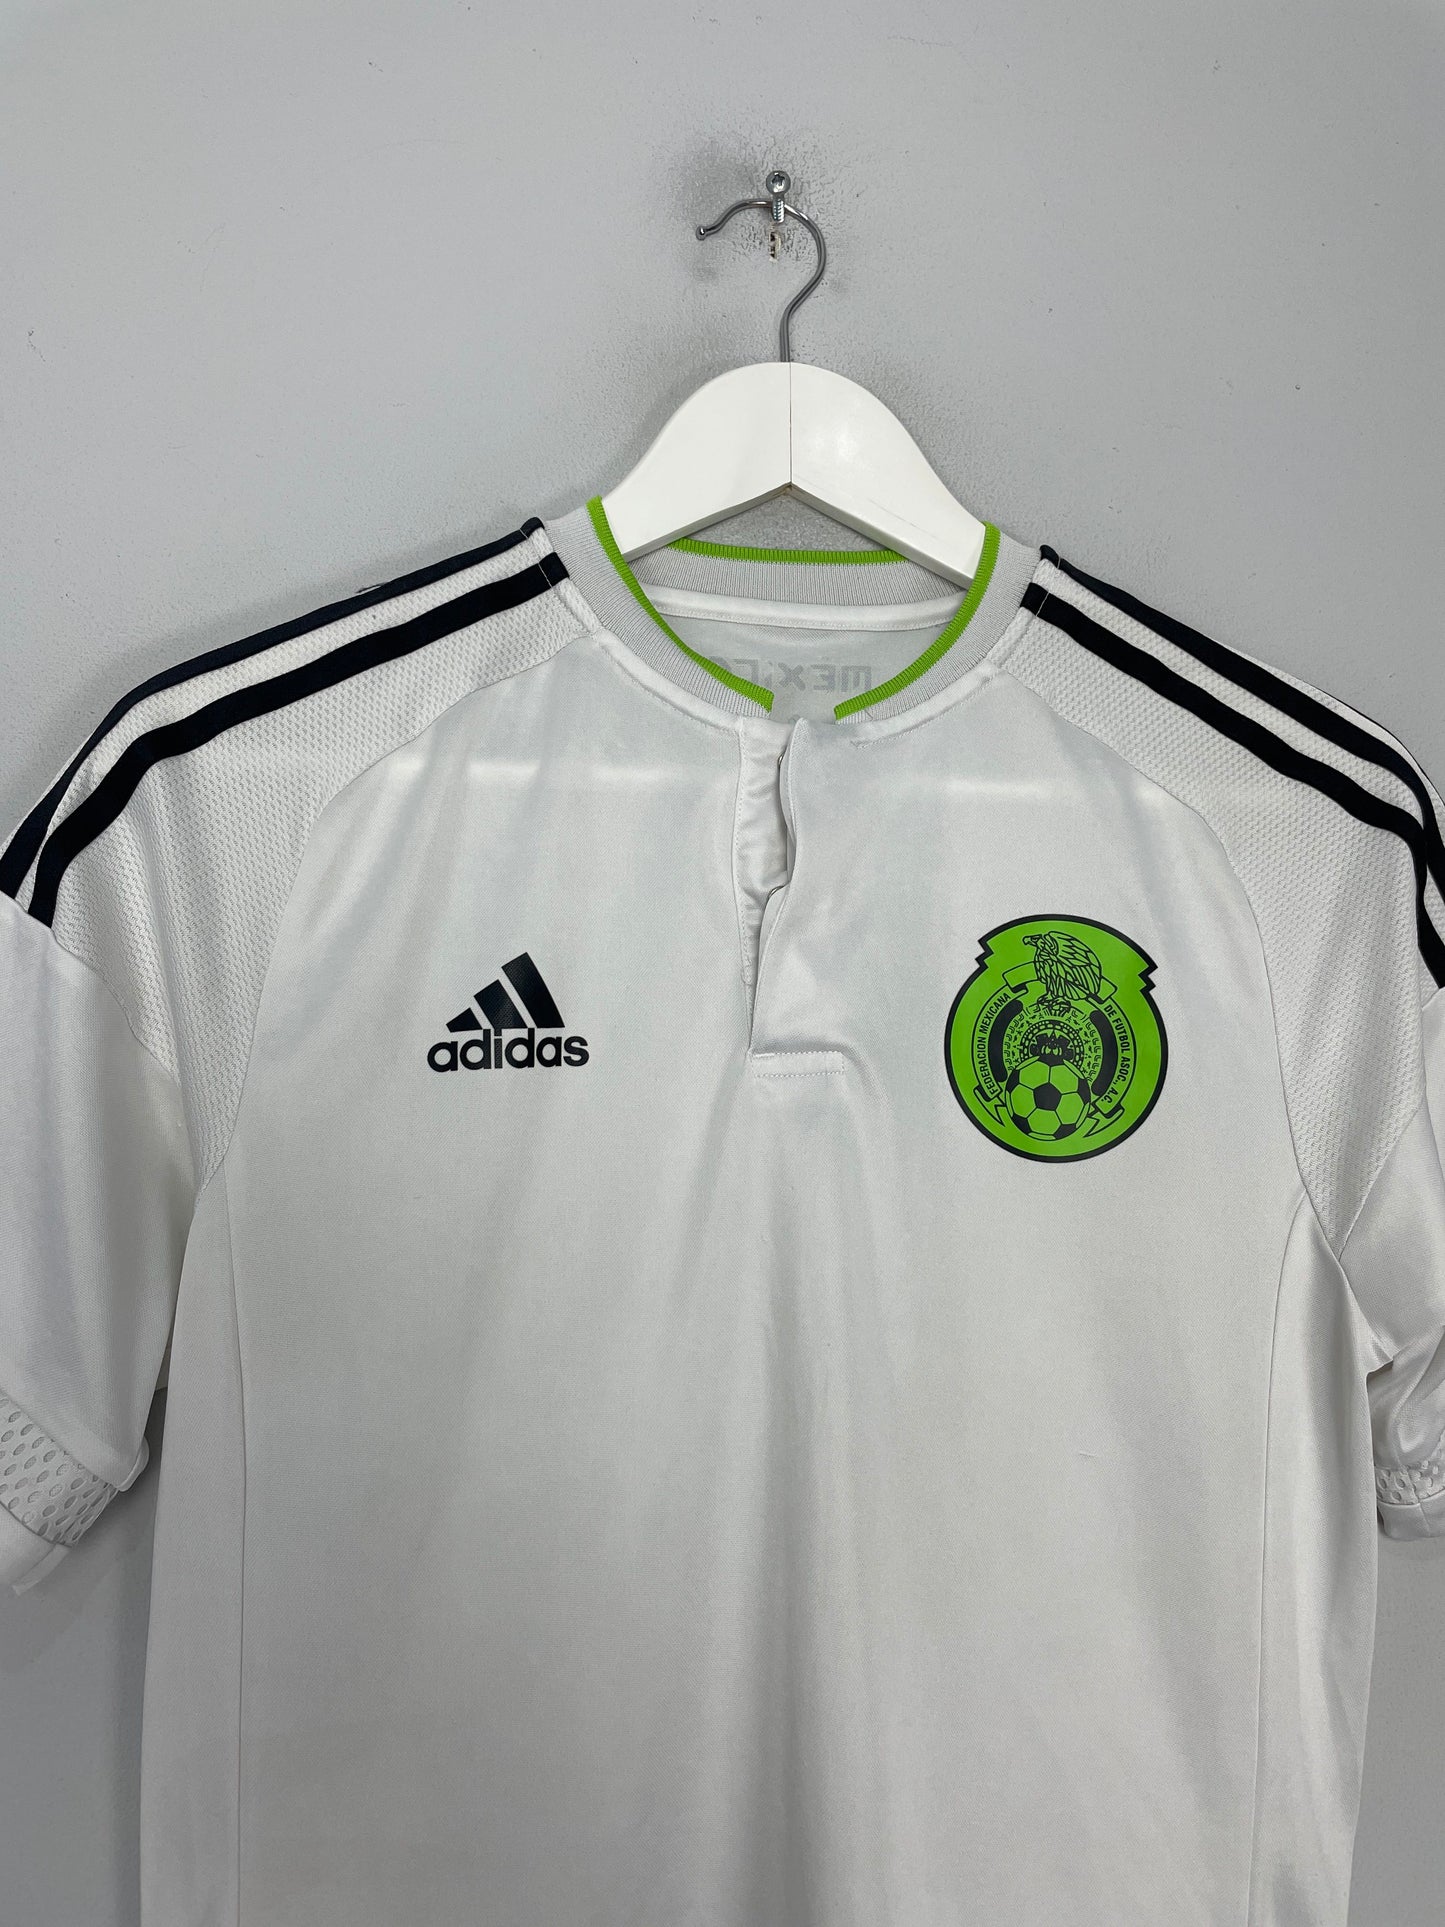 2015/16 MEXICO *PLAYER ISSUE* AWAY SHIRT (S) ADIDAS